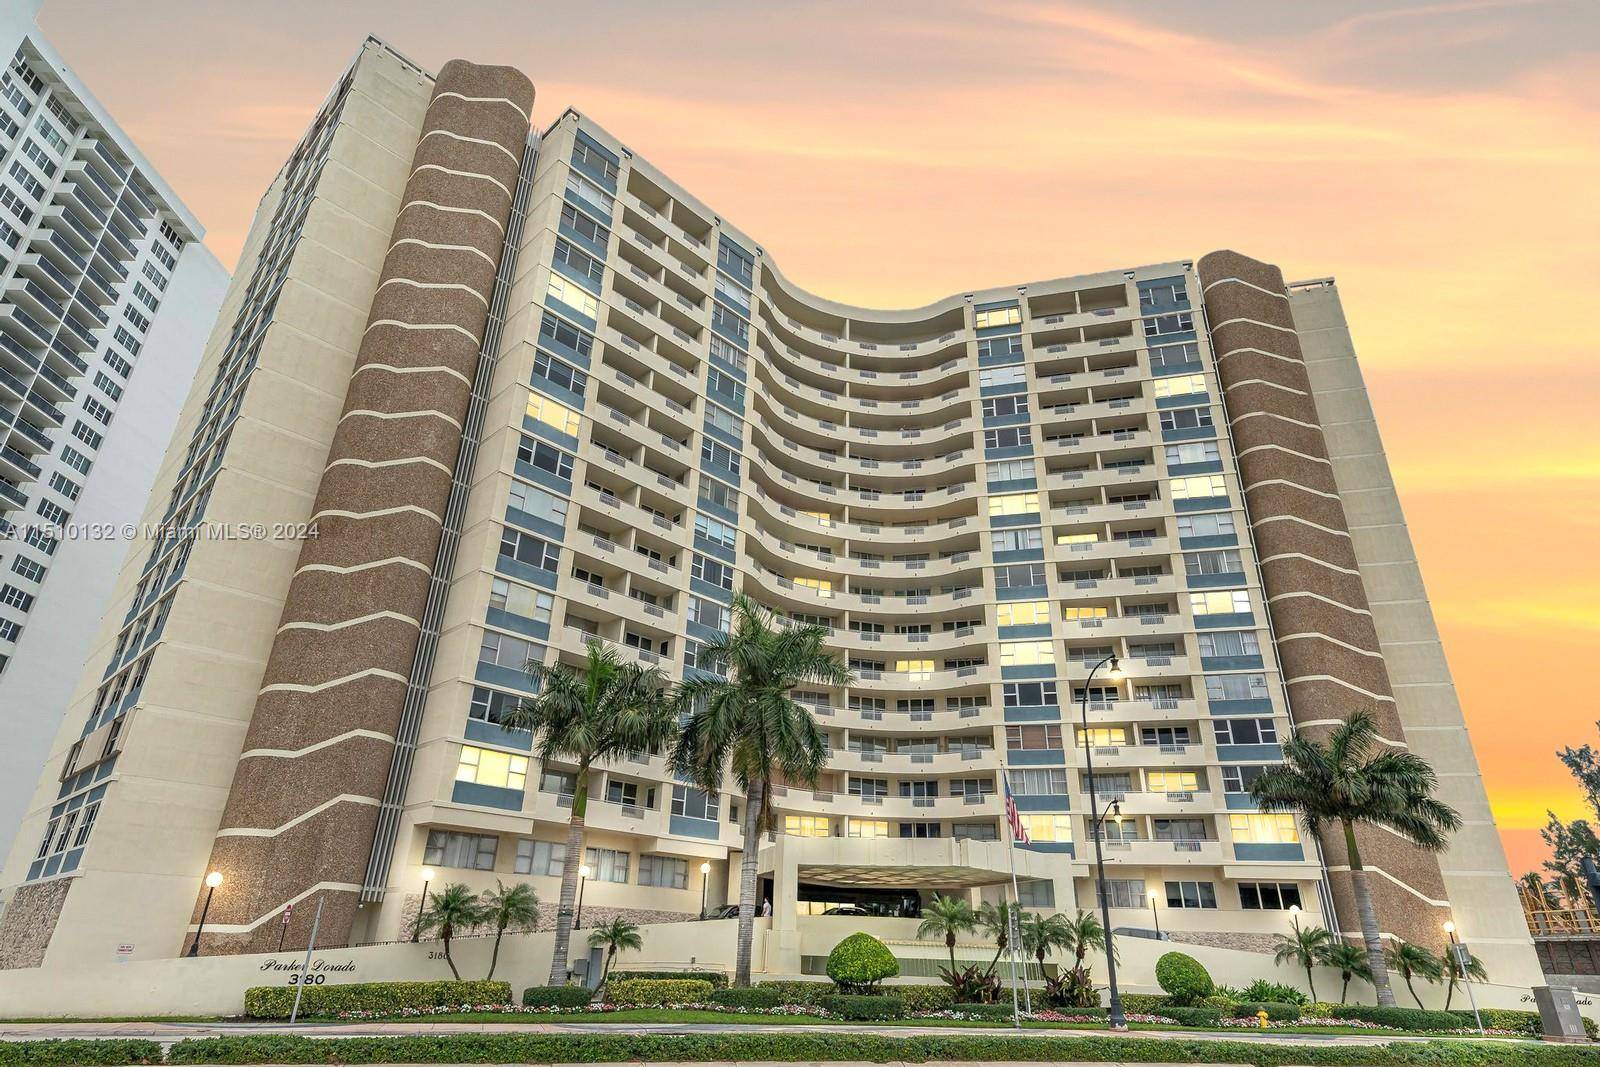 EXPERIENCE OCEANFRONT LIVING AT ITS FINEST FROM THE 9TH FLOOR OF THE LUXURIOUS PARKER DORADO BUILDING.